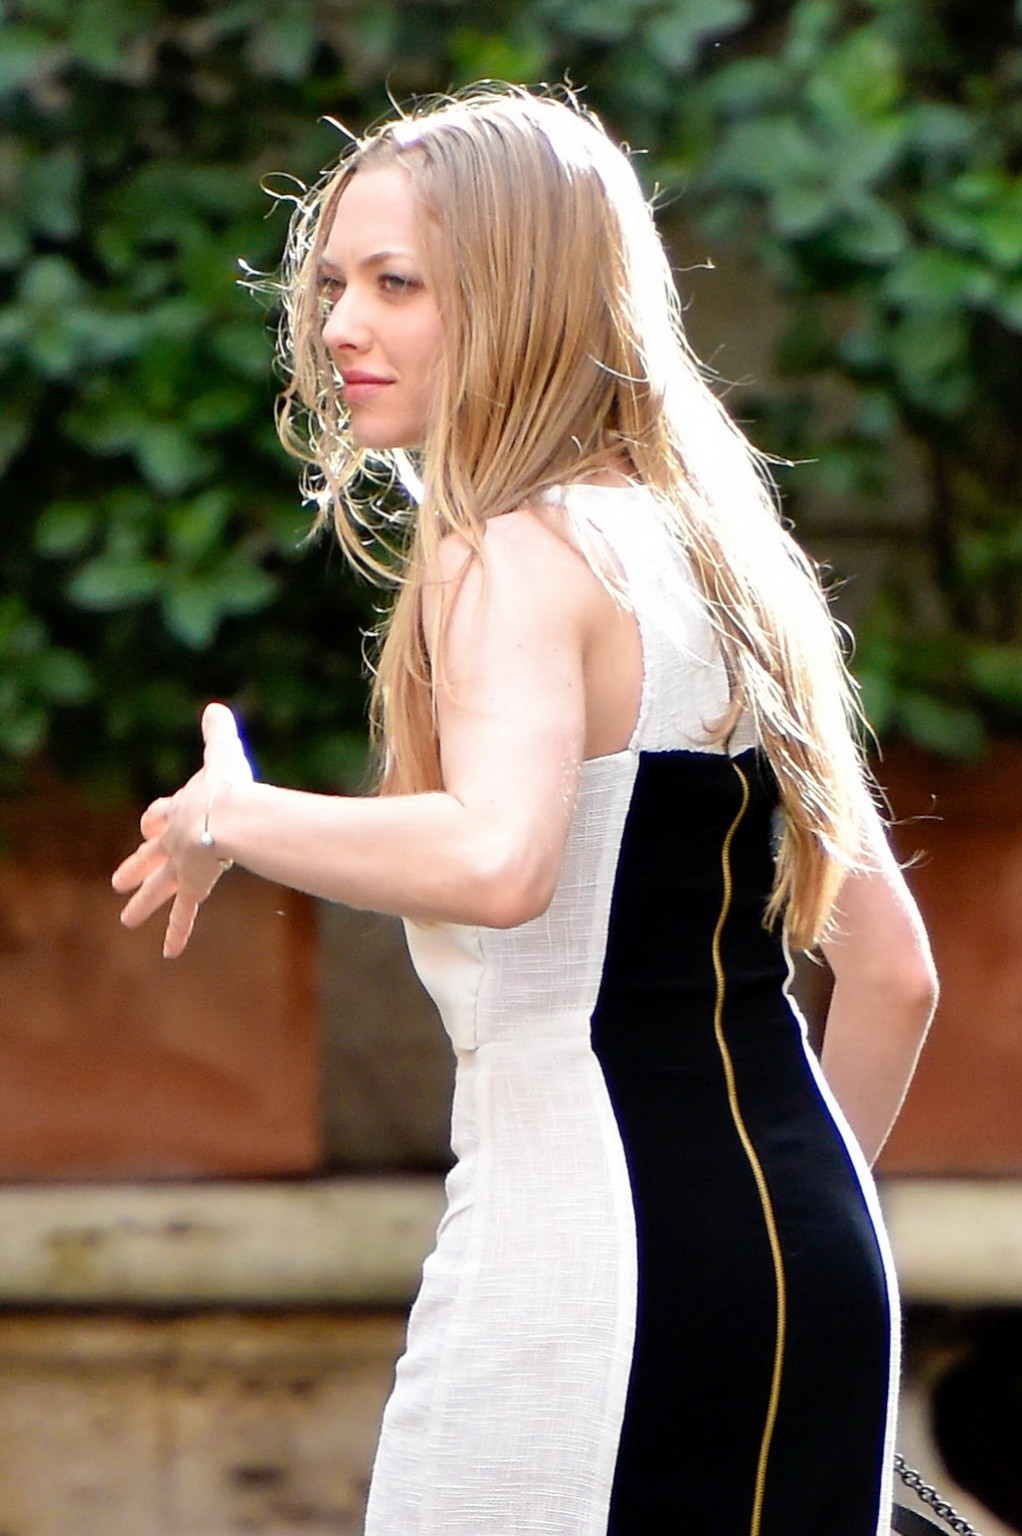 Amanda Seyfried showing cleavage and upskirt at the photoshoot in Rome #75168394